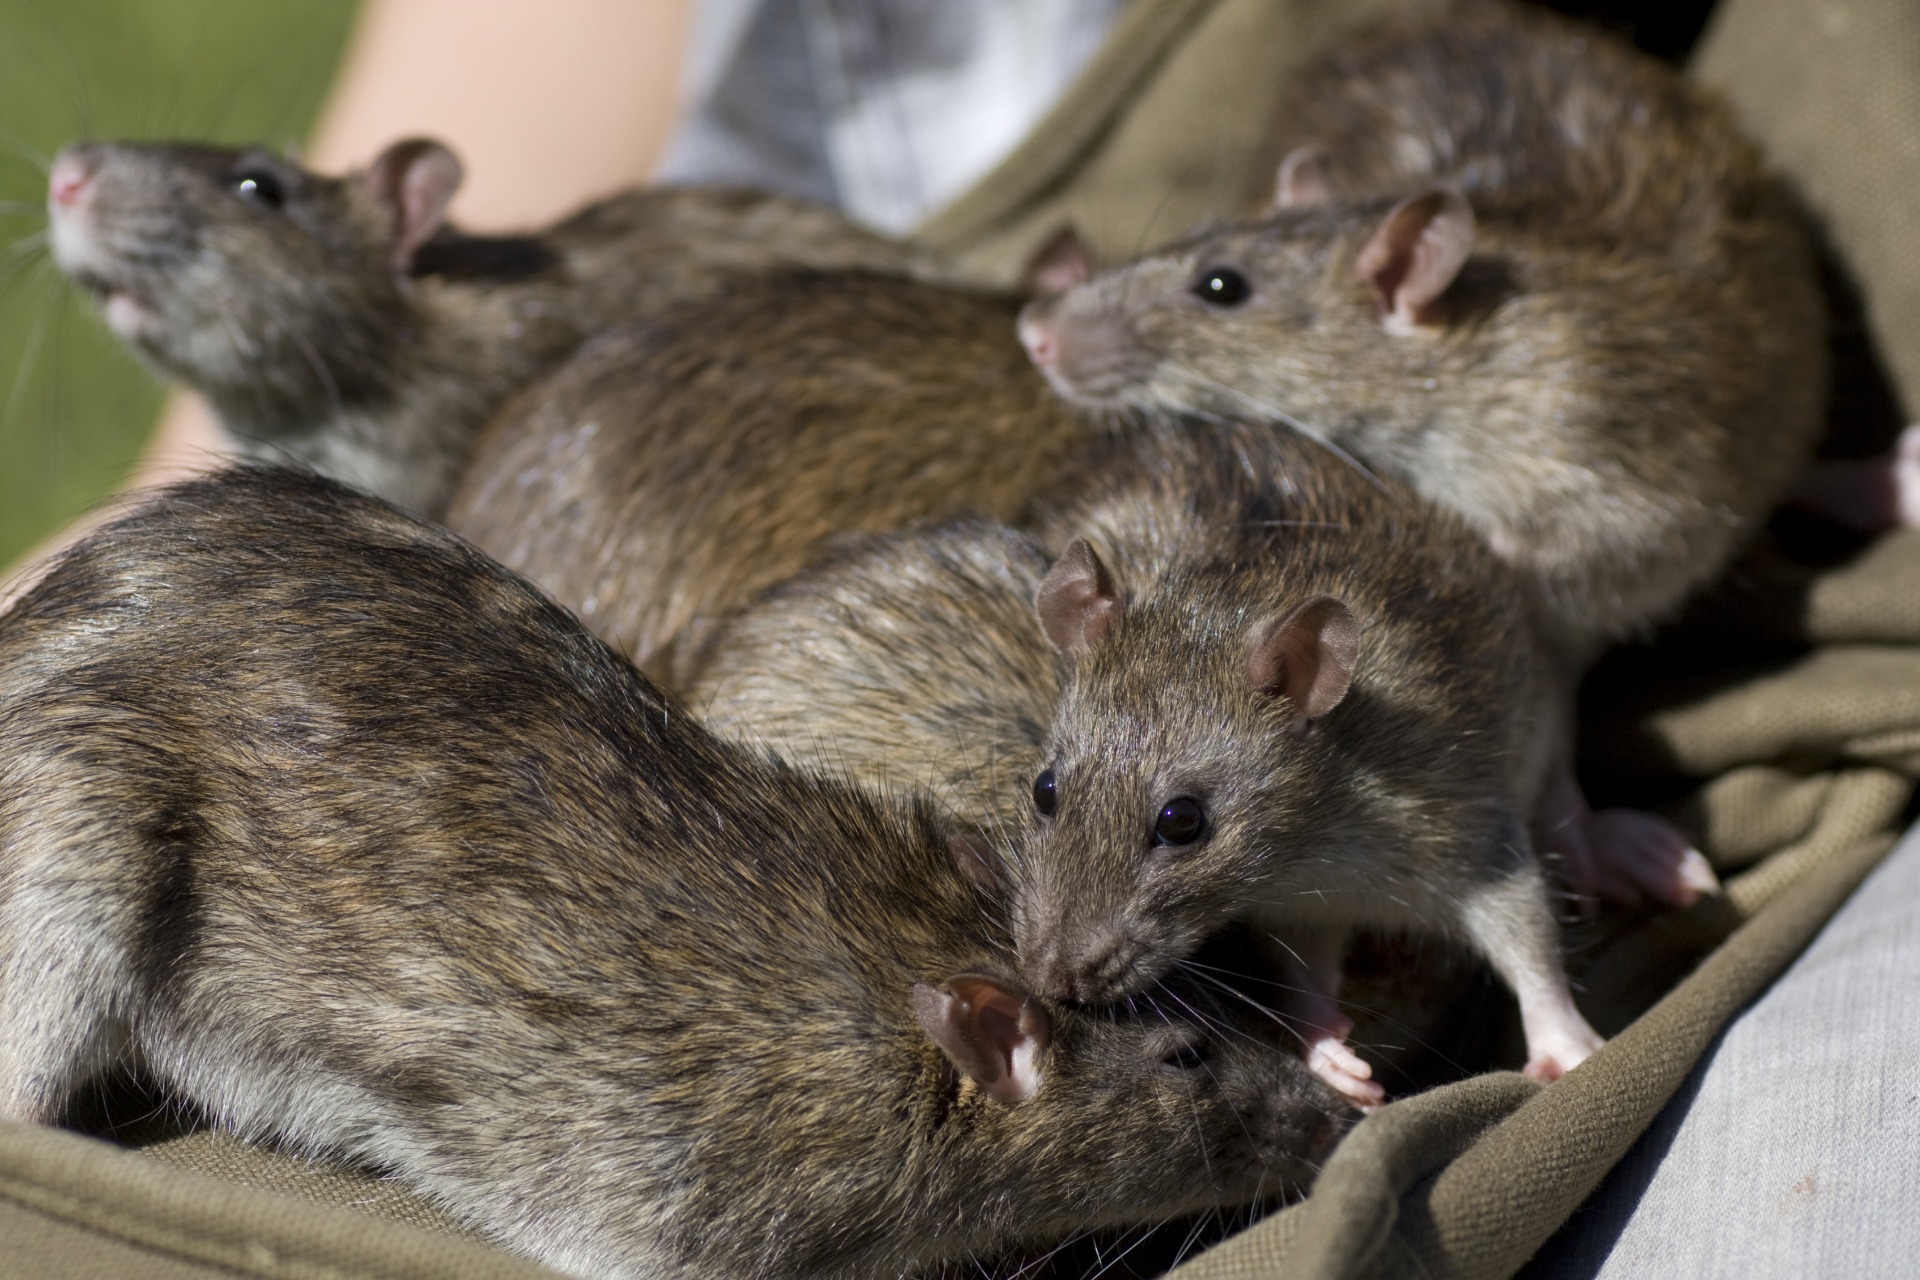 group of rats